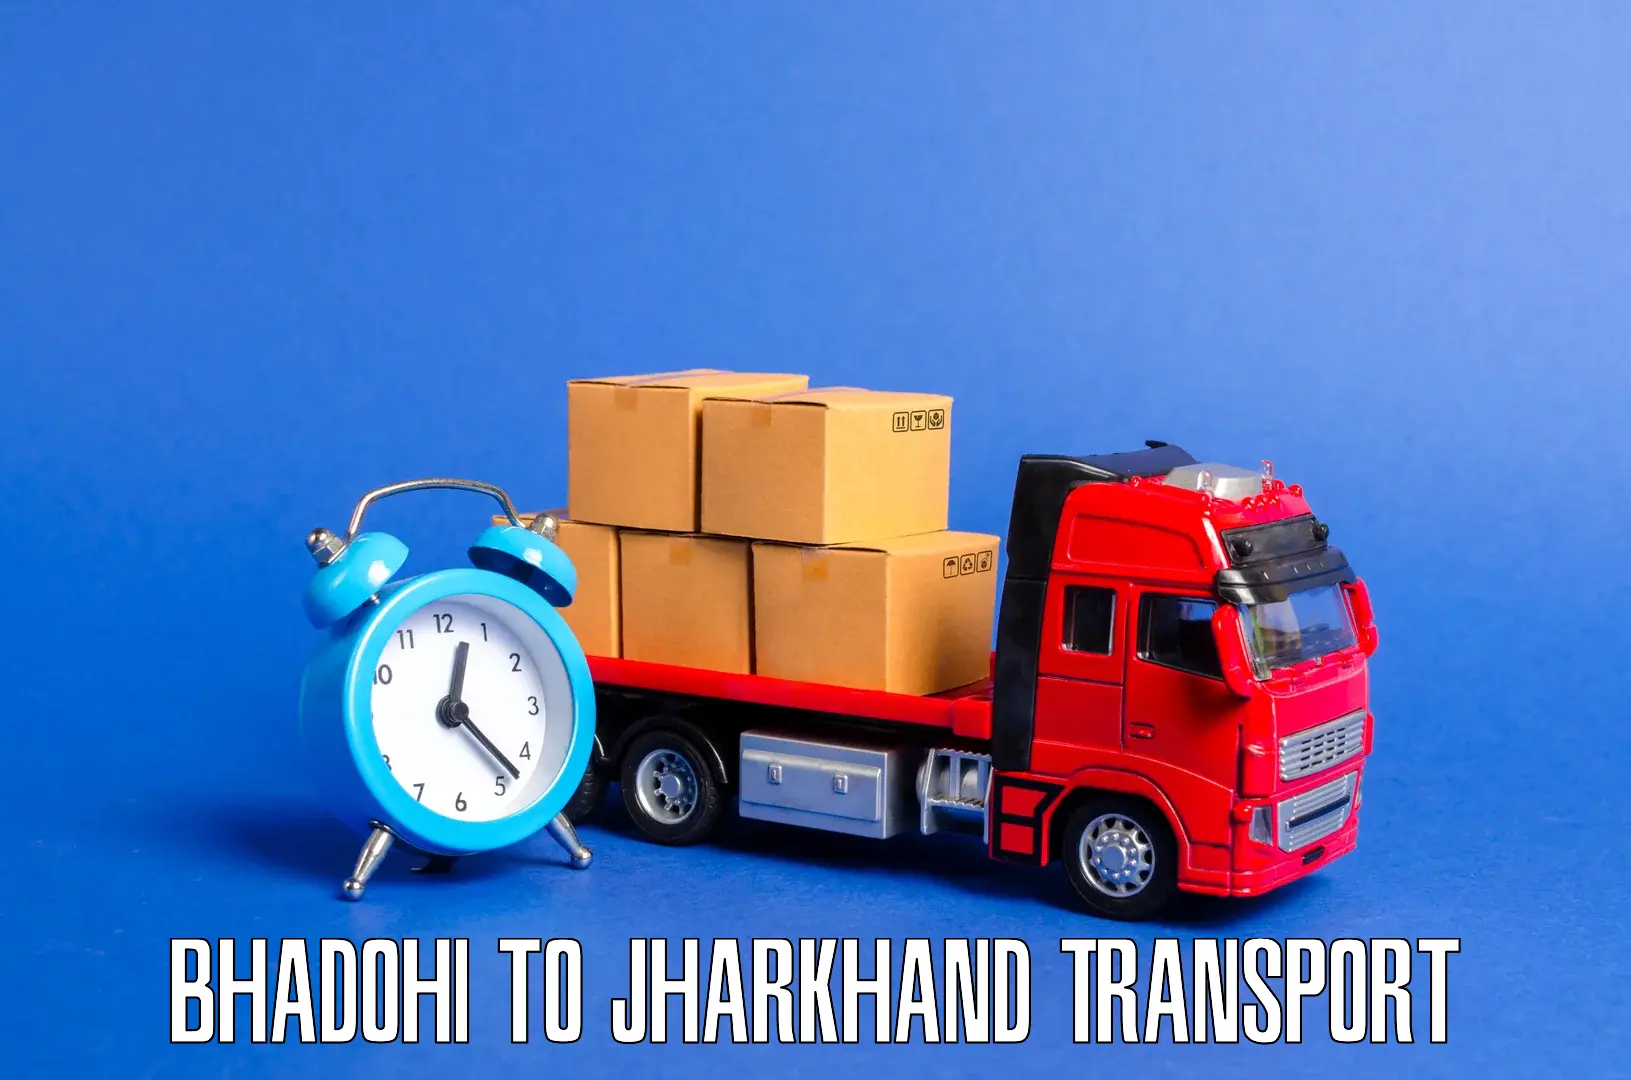 Nearest transport service in Bhadohi to Deoghar